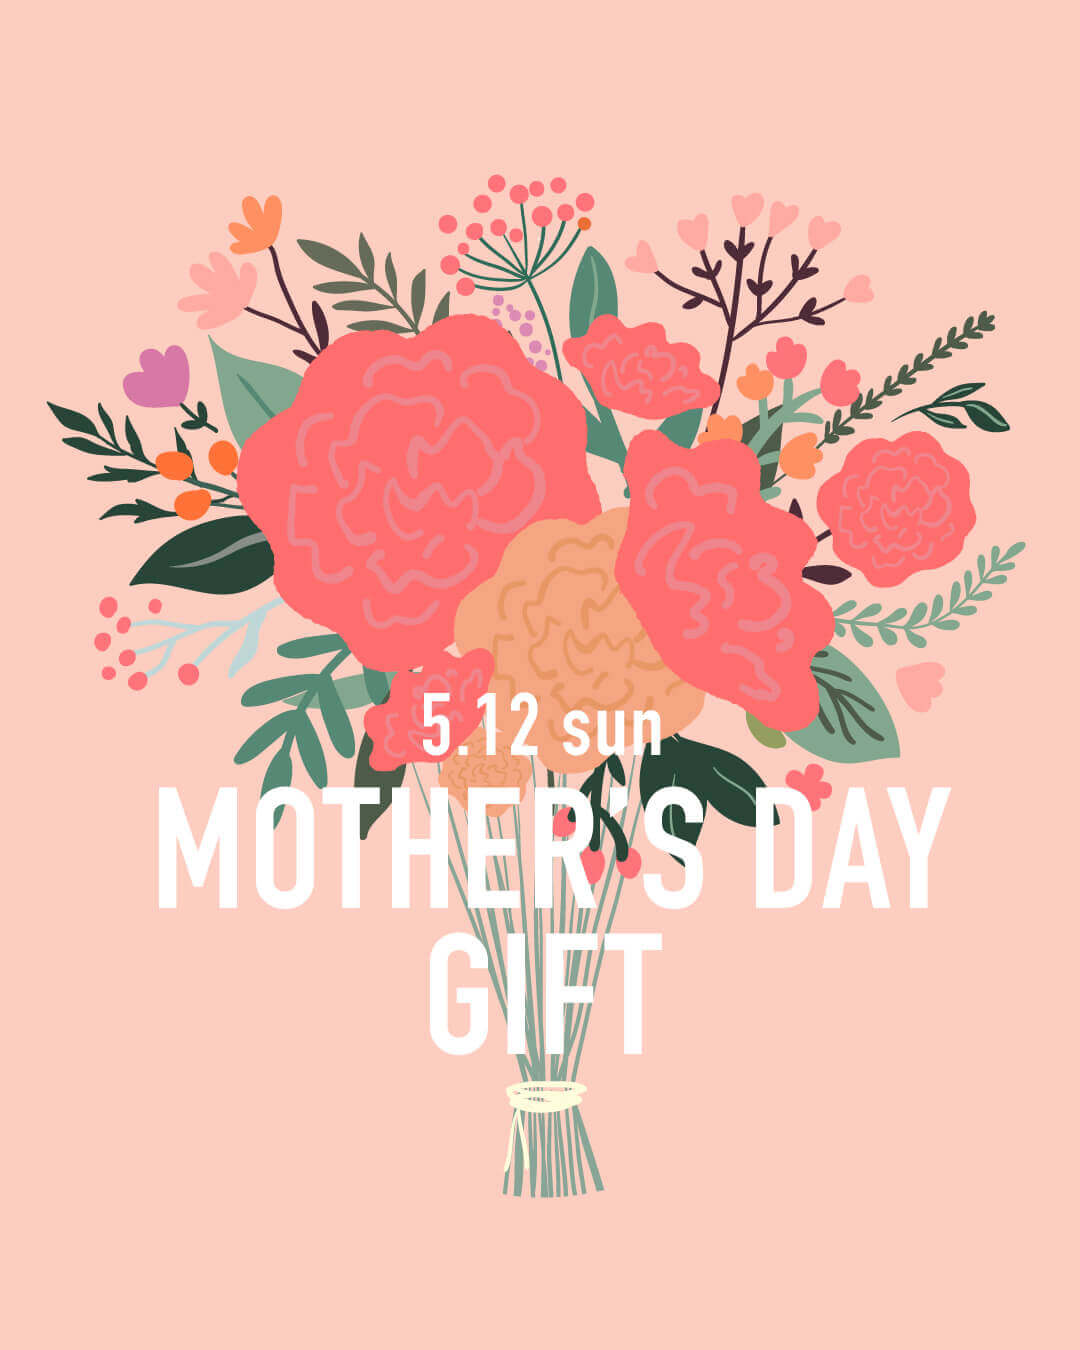 Fashion / Apparel, Interior / Accessories, Mother's Day, Simple, Casual, Illustration Banner Designs